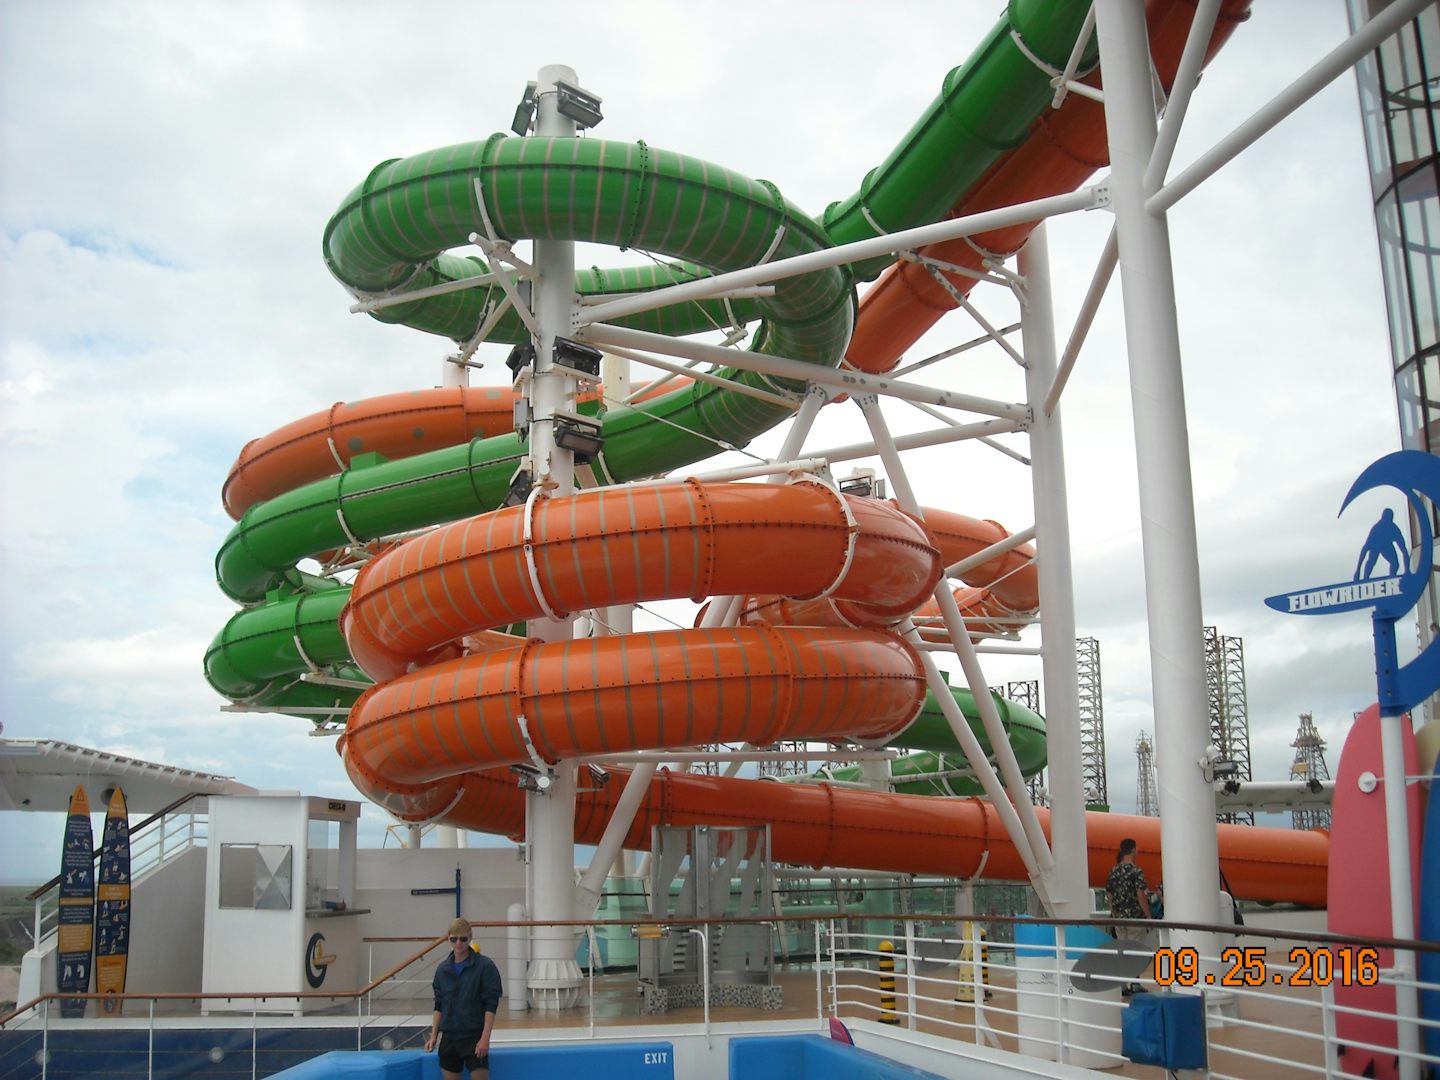 water slide, all enclosed